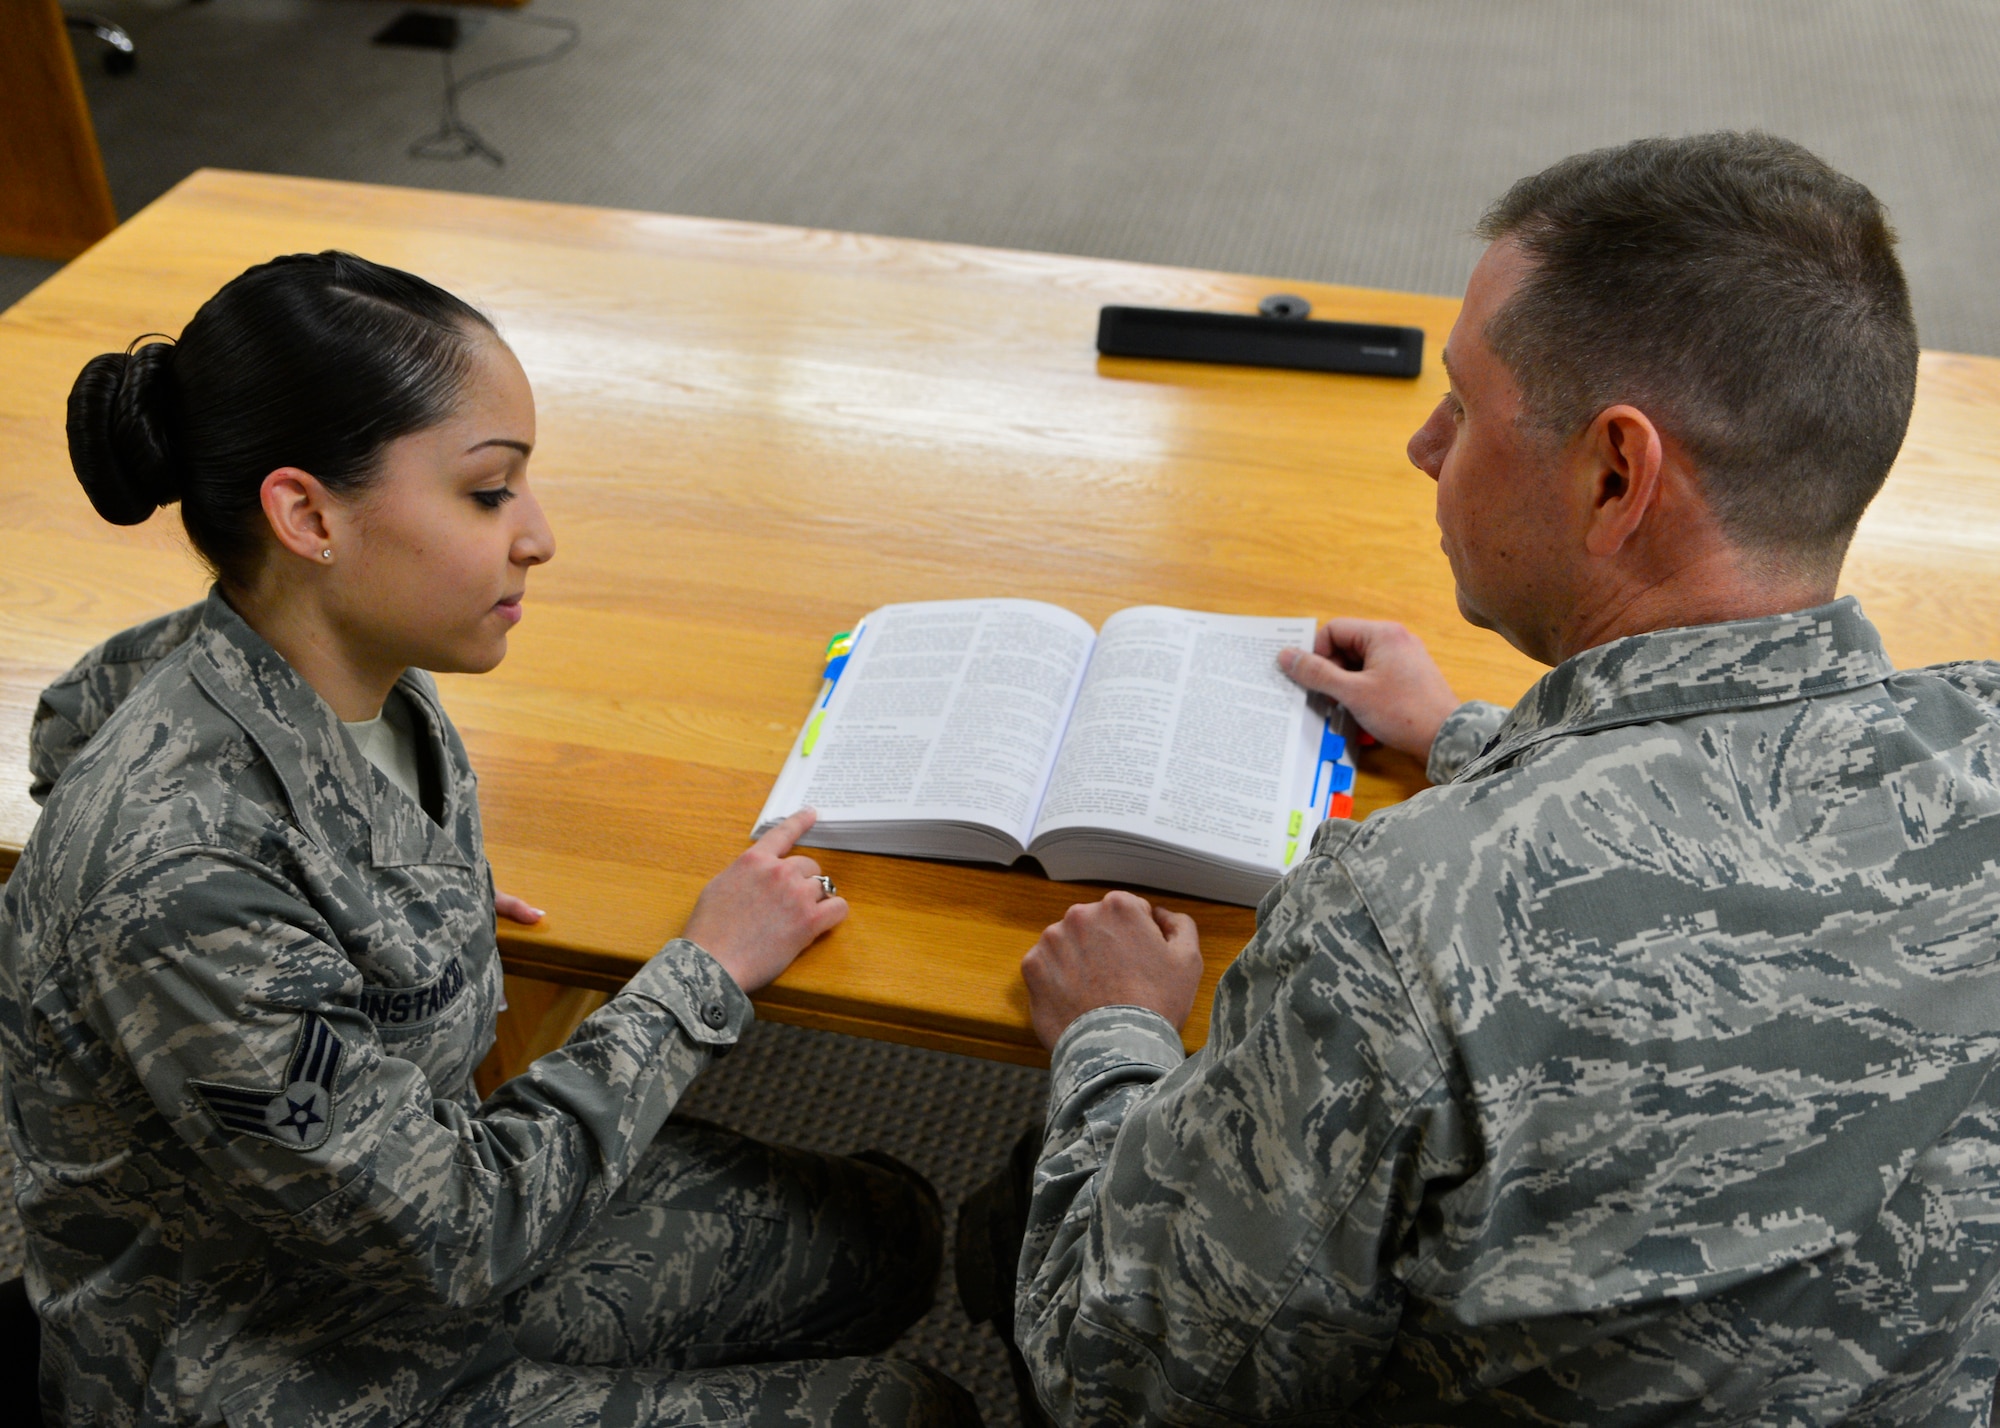 Lt. Col. Scott Boehne, 436th Airlift Wing staff judge advocate, and Senior Airman Savella Constancio, 436th AW general law paralegal, review the Manual for Courts-Martial Jan. 29, 2014, in the courtroom on Dover Air Force Base, Del. The MCM is the official guide to the conduct of courts-martial in the United States military. (U.S. Air Force photo/Airman 1st Class William Johnson)